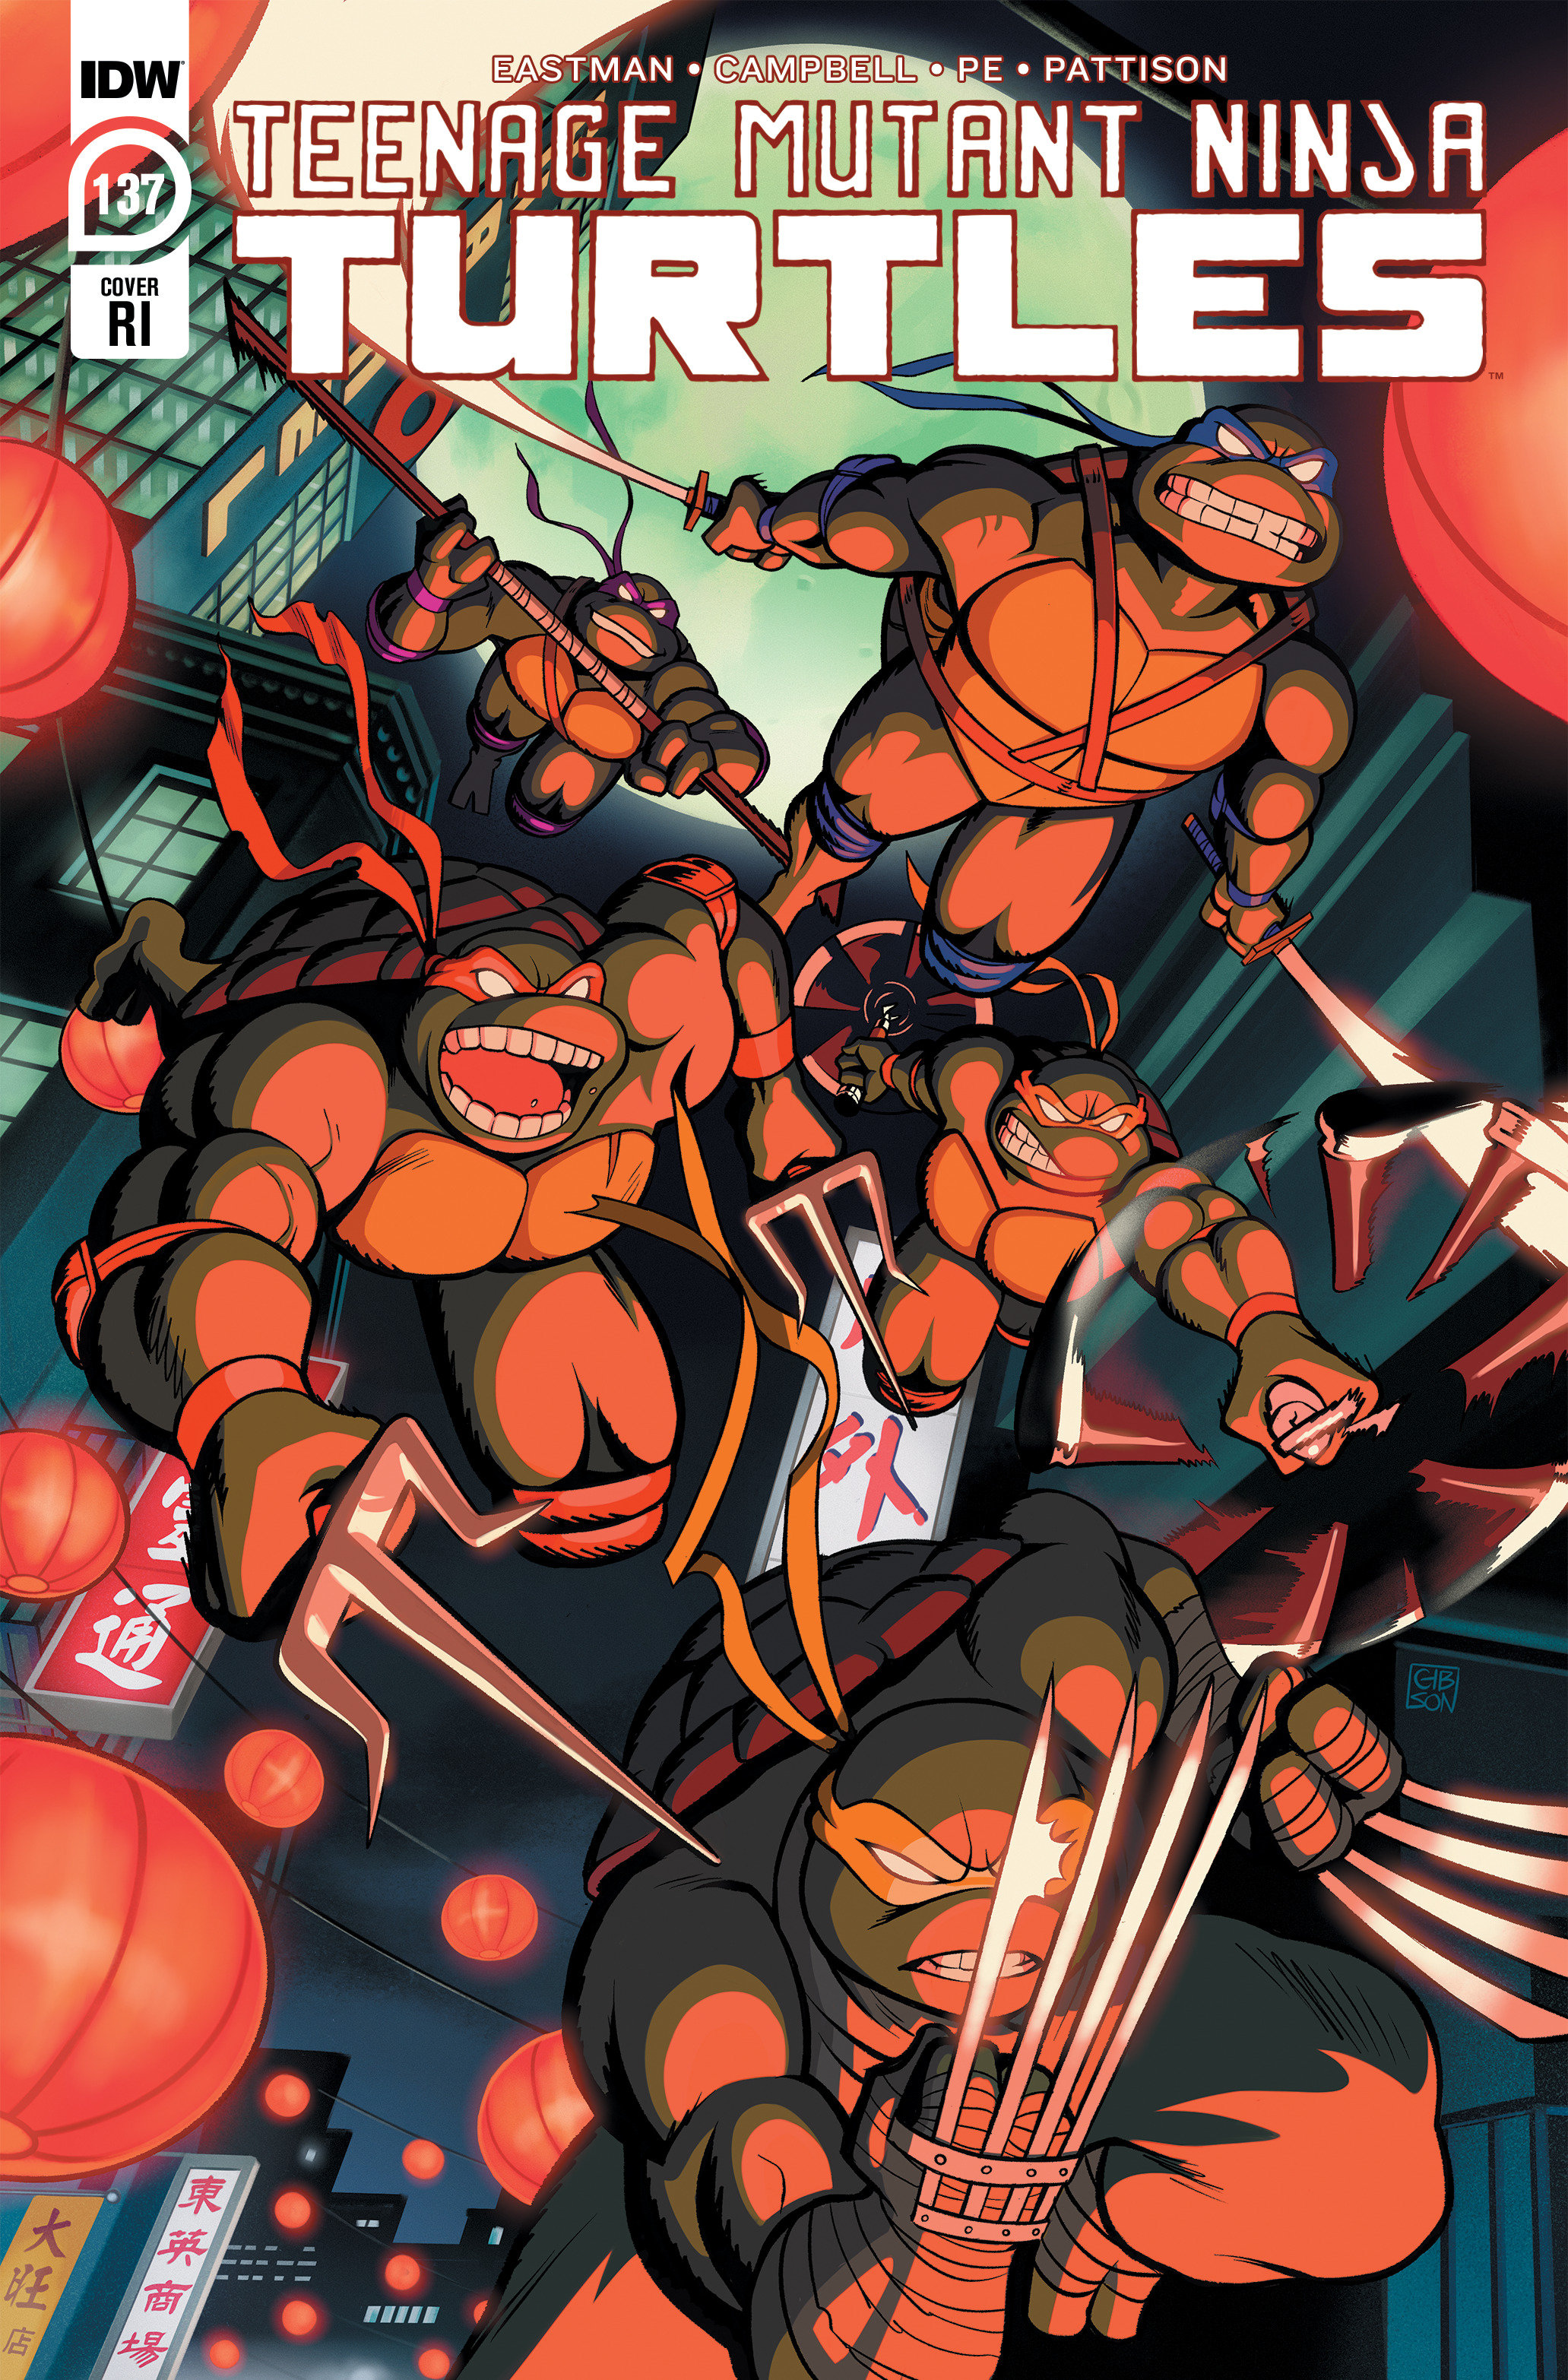 Teenage Mutant Ninja Turtles Ongoing #137 Cover C 1 for 10 Incentive Gibson (2011)